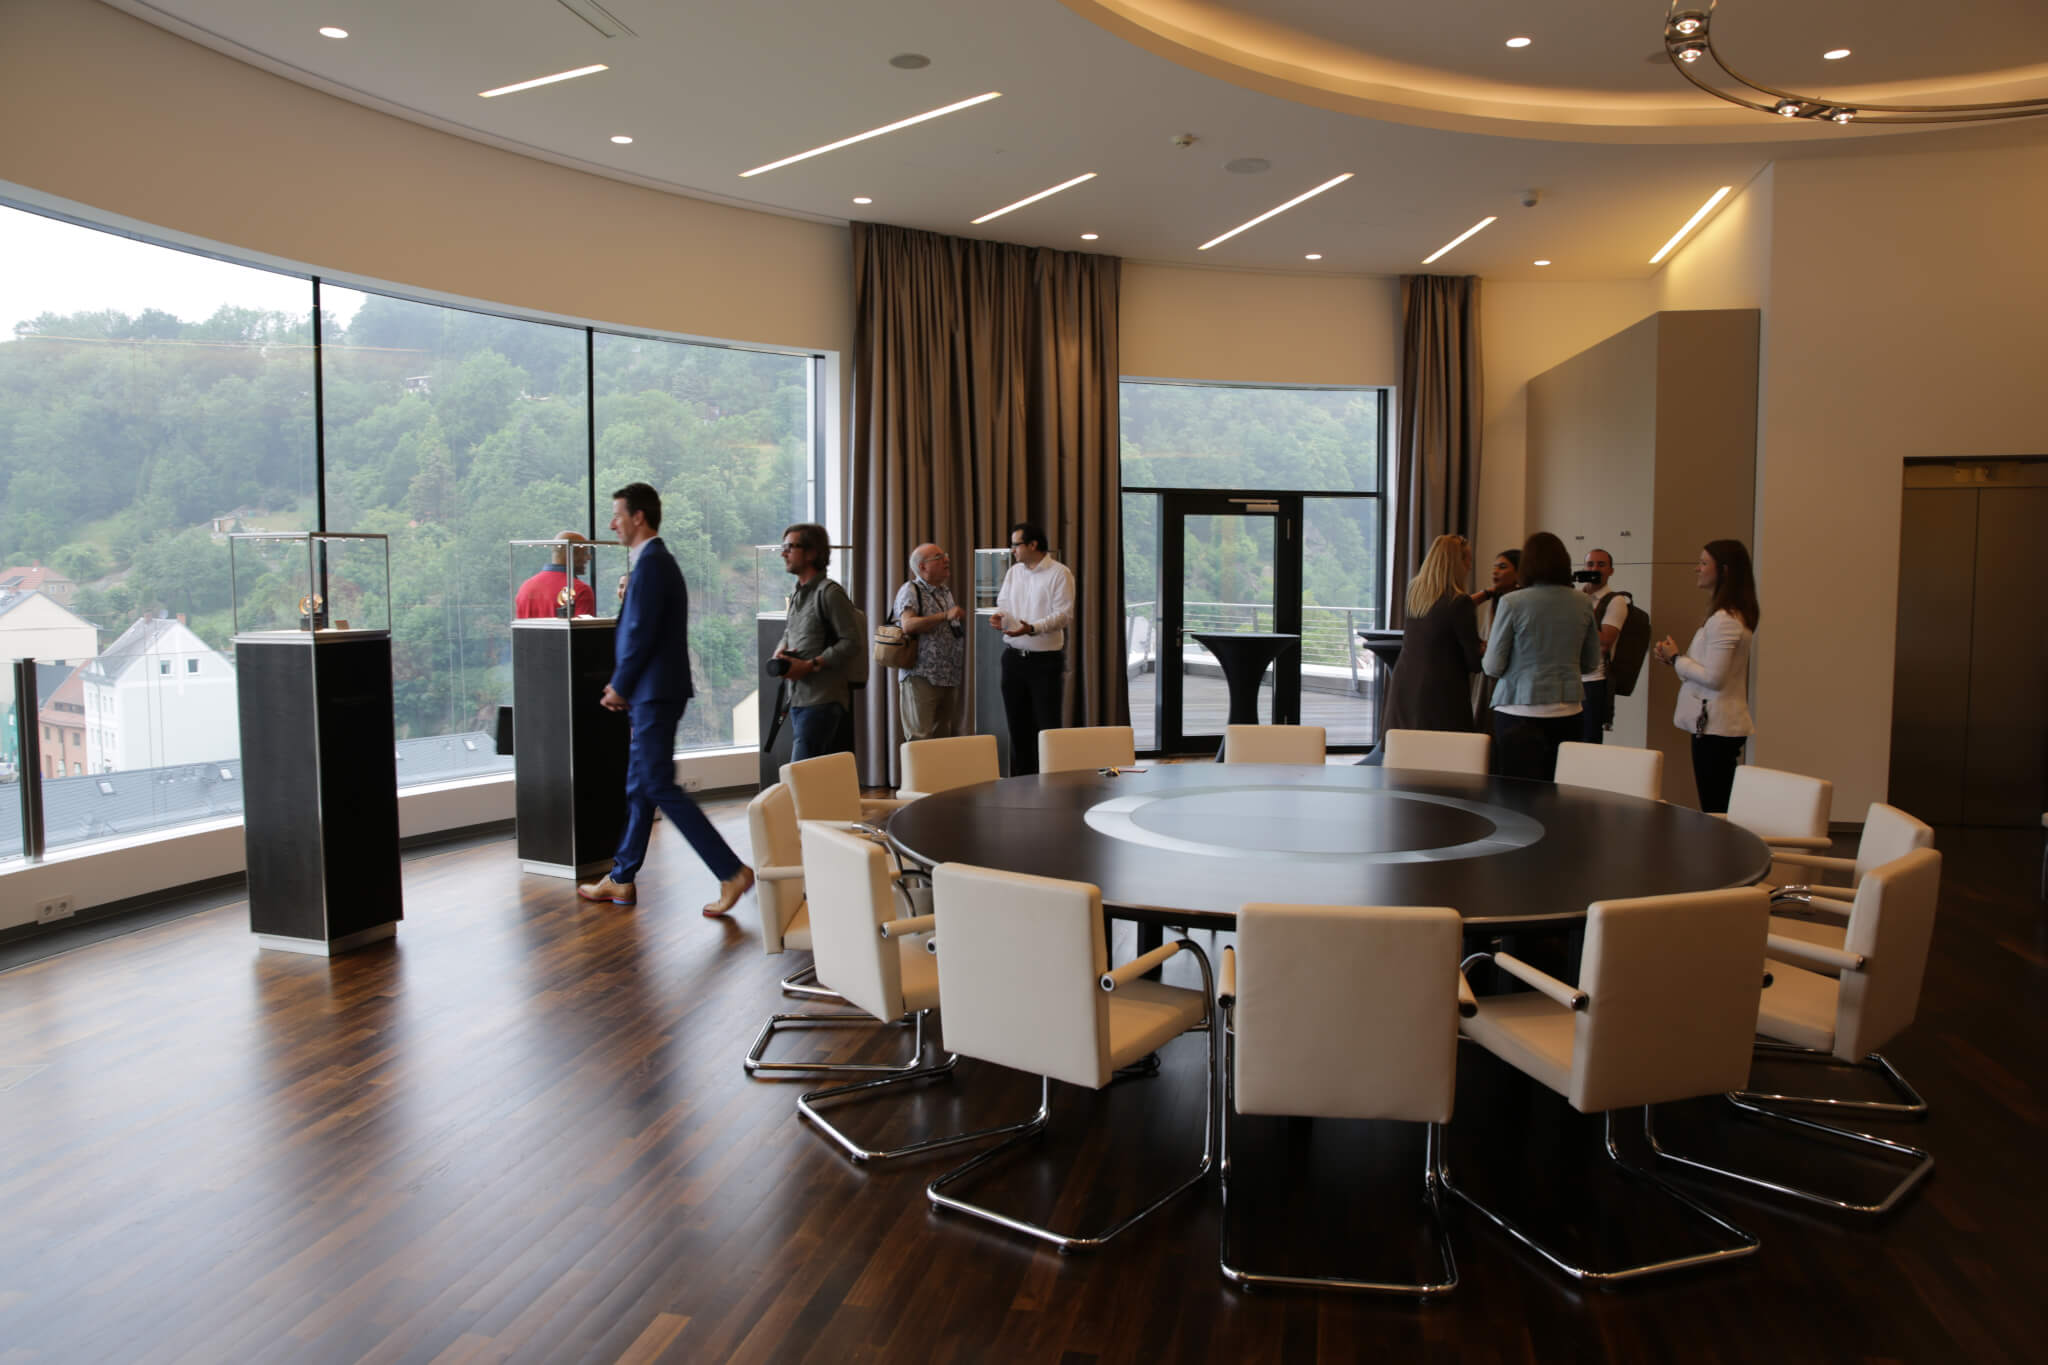 Sensational views over Glashutte from the nautical-feel Moritz Grossmann conference room